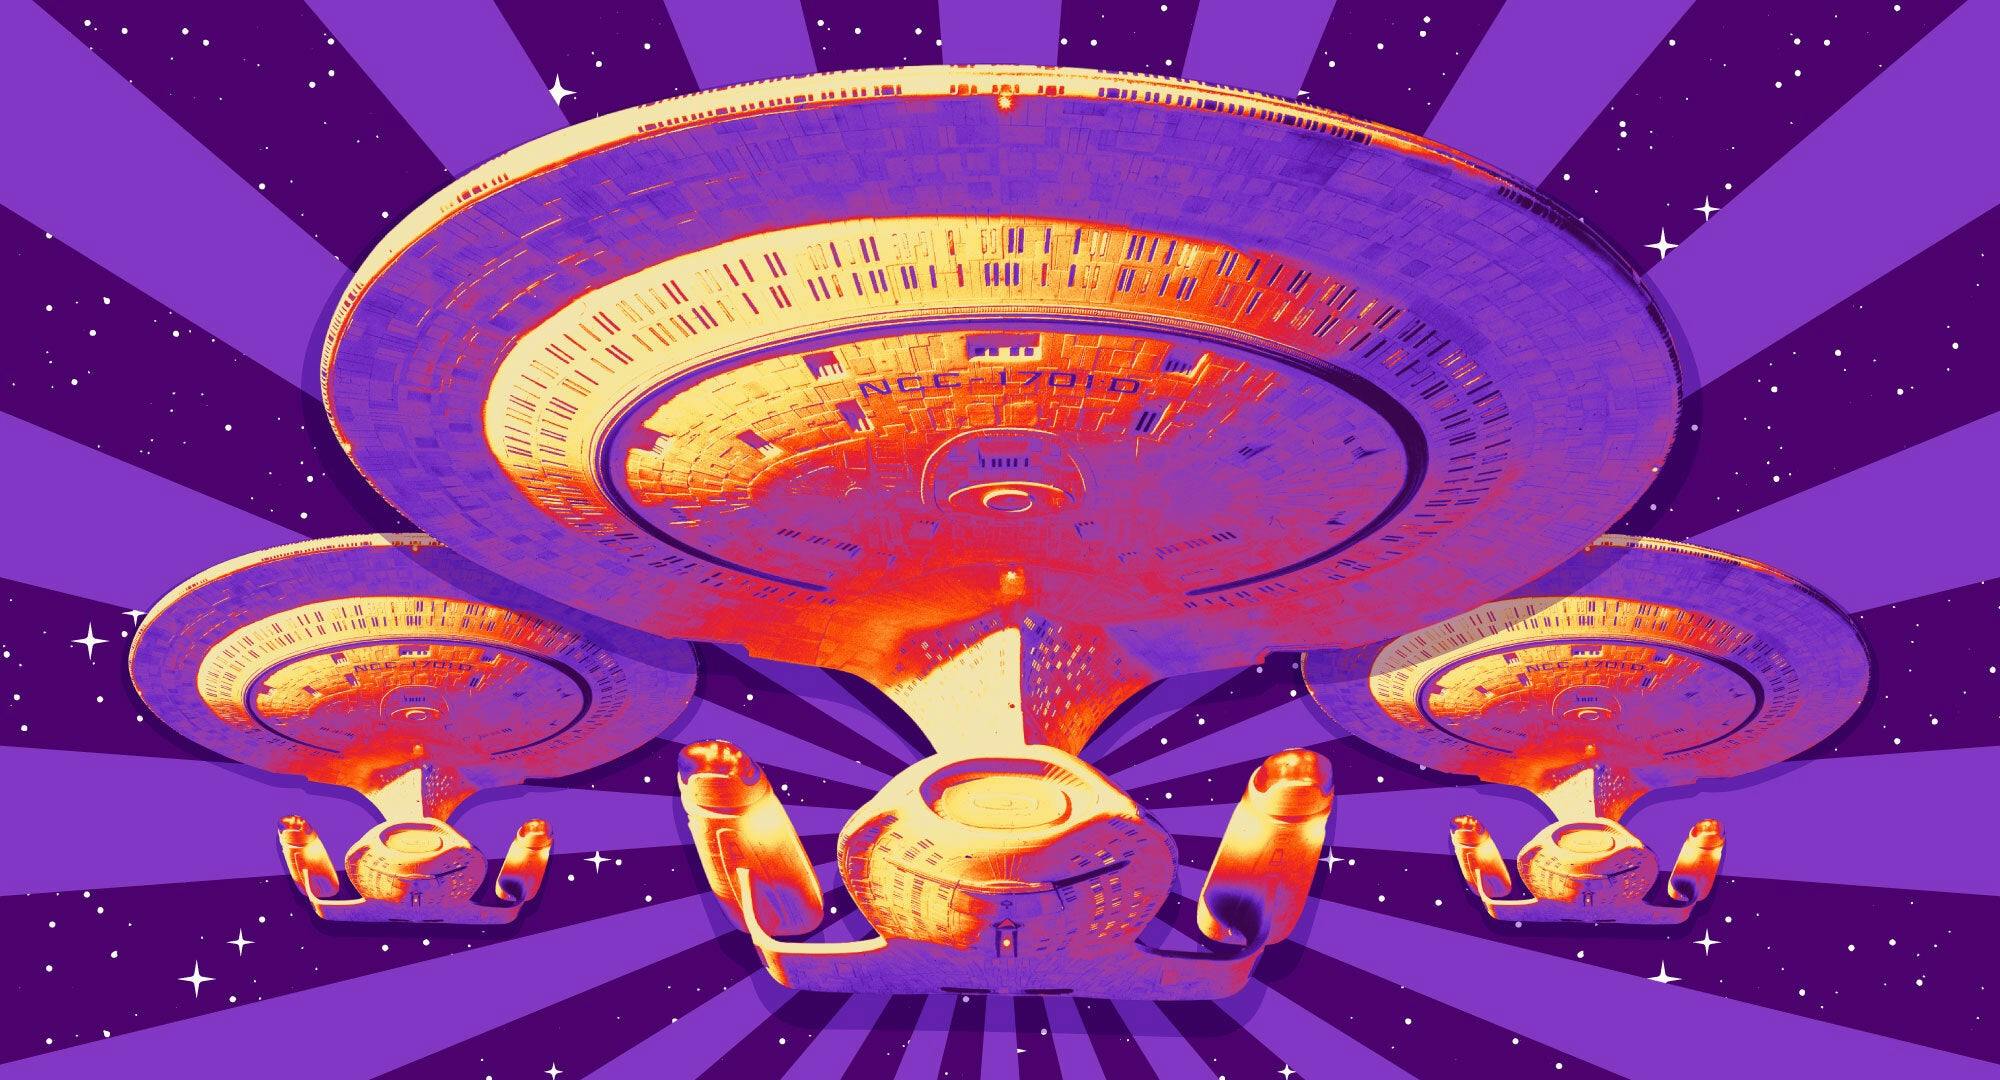 Illustrated banner featuring the U.S.S. Enterprise-D